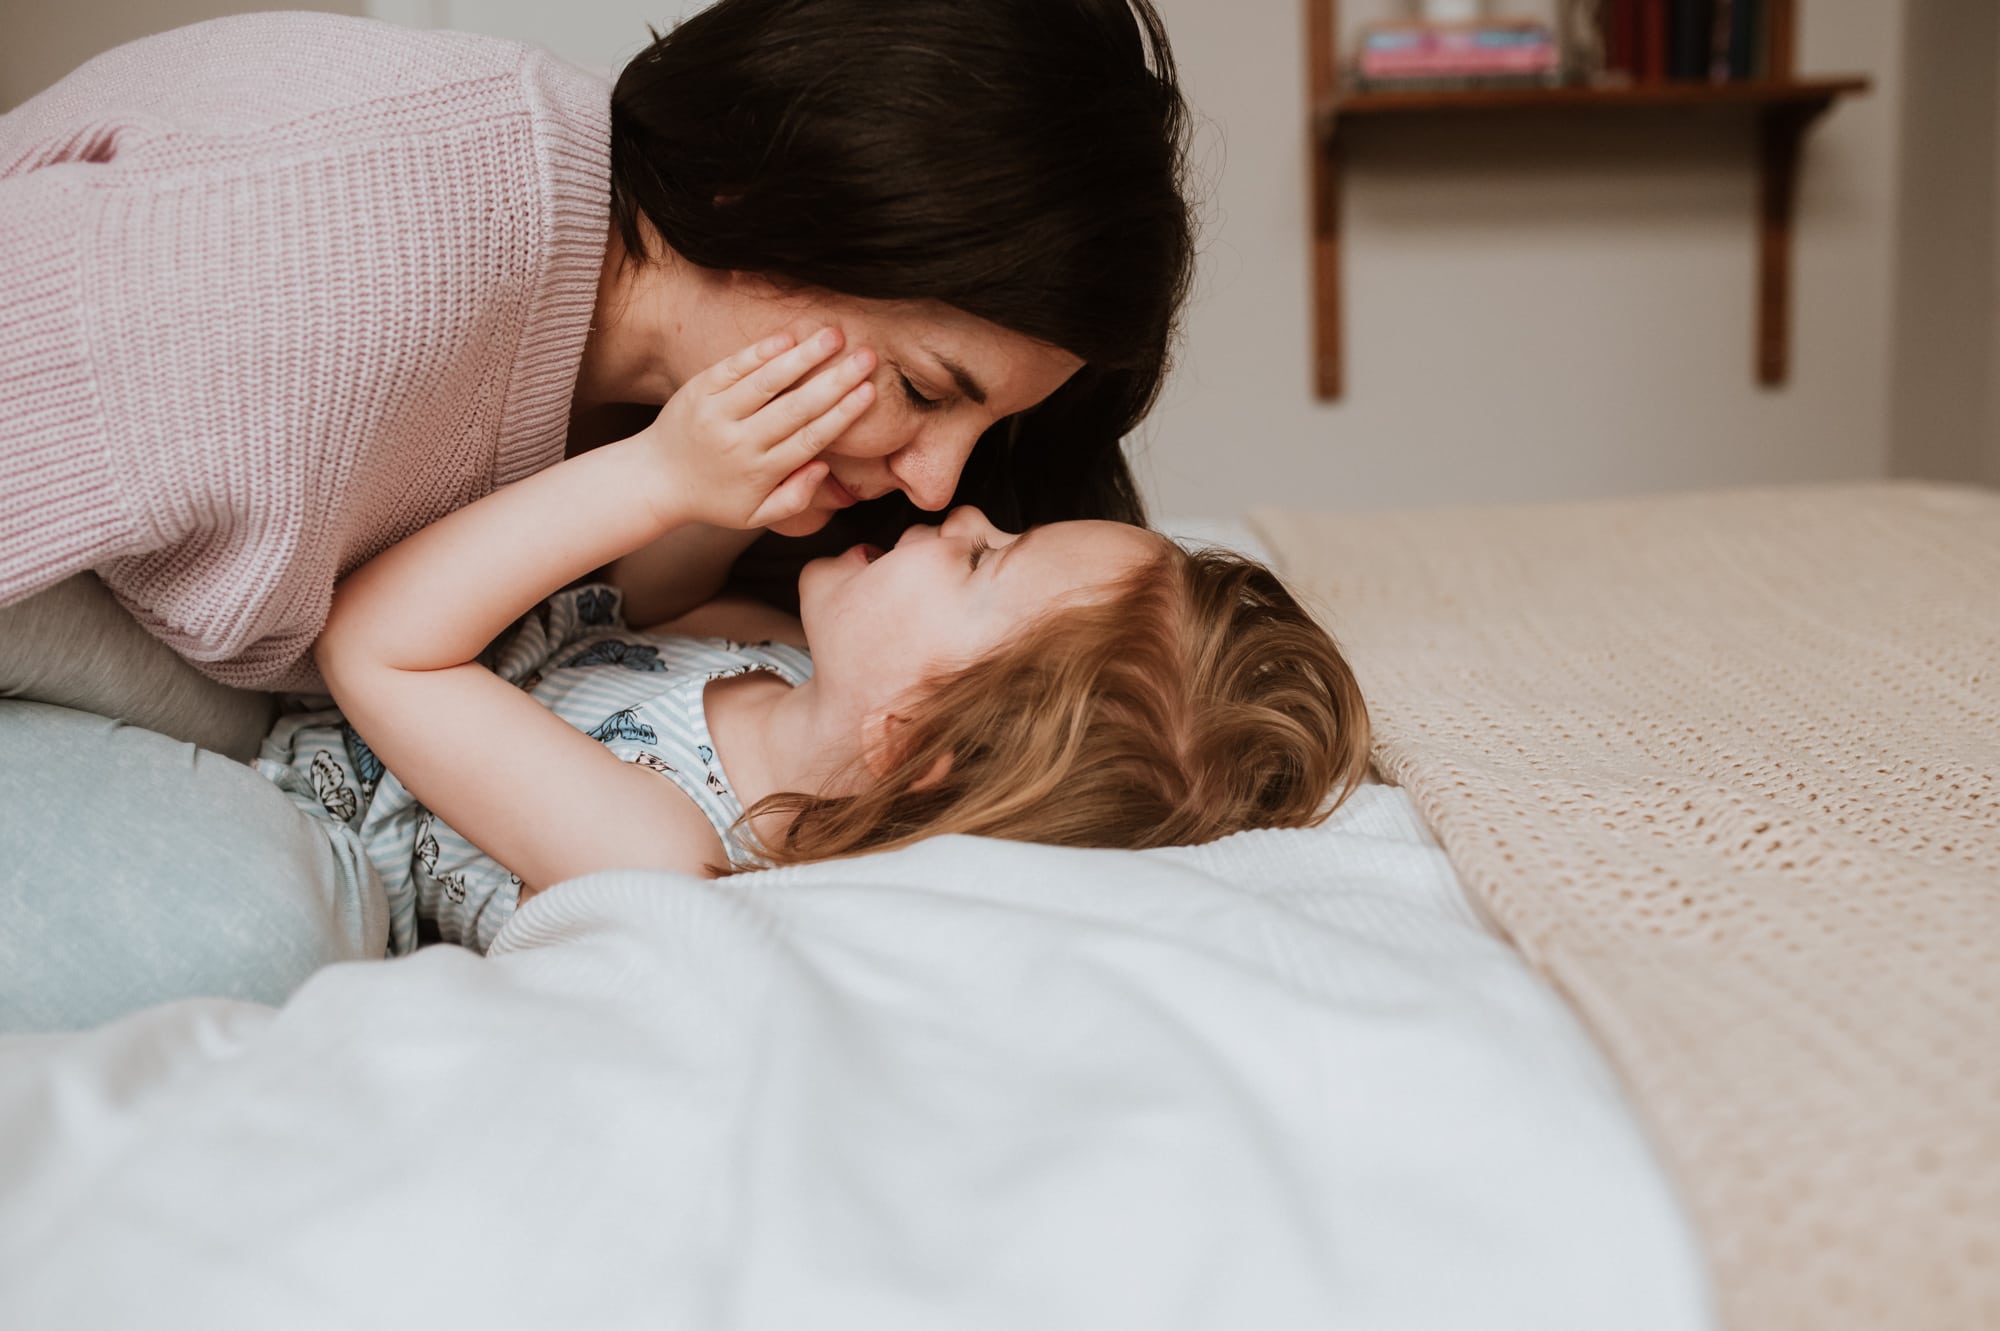 Vancouver indoor family session shows mom and daughter tenderly rubbing noses